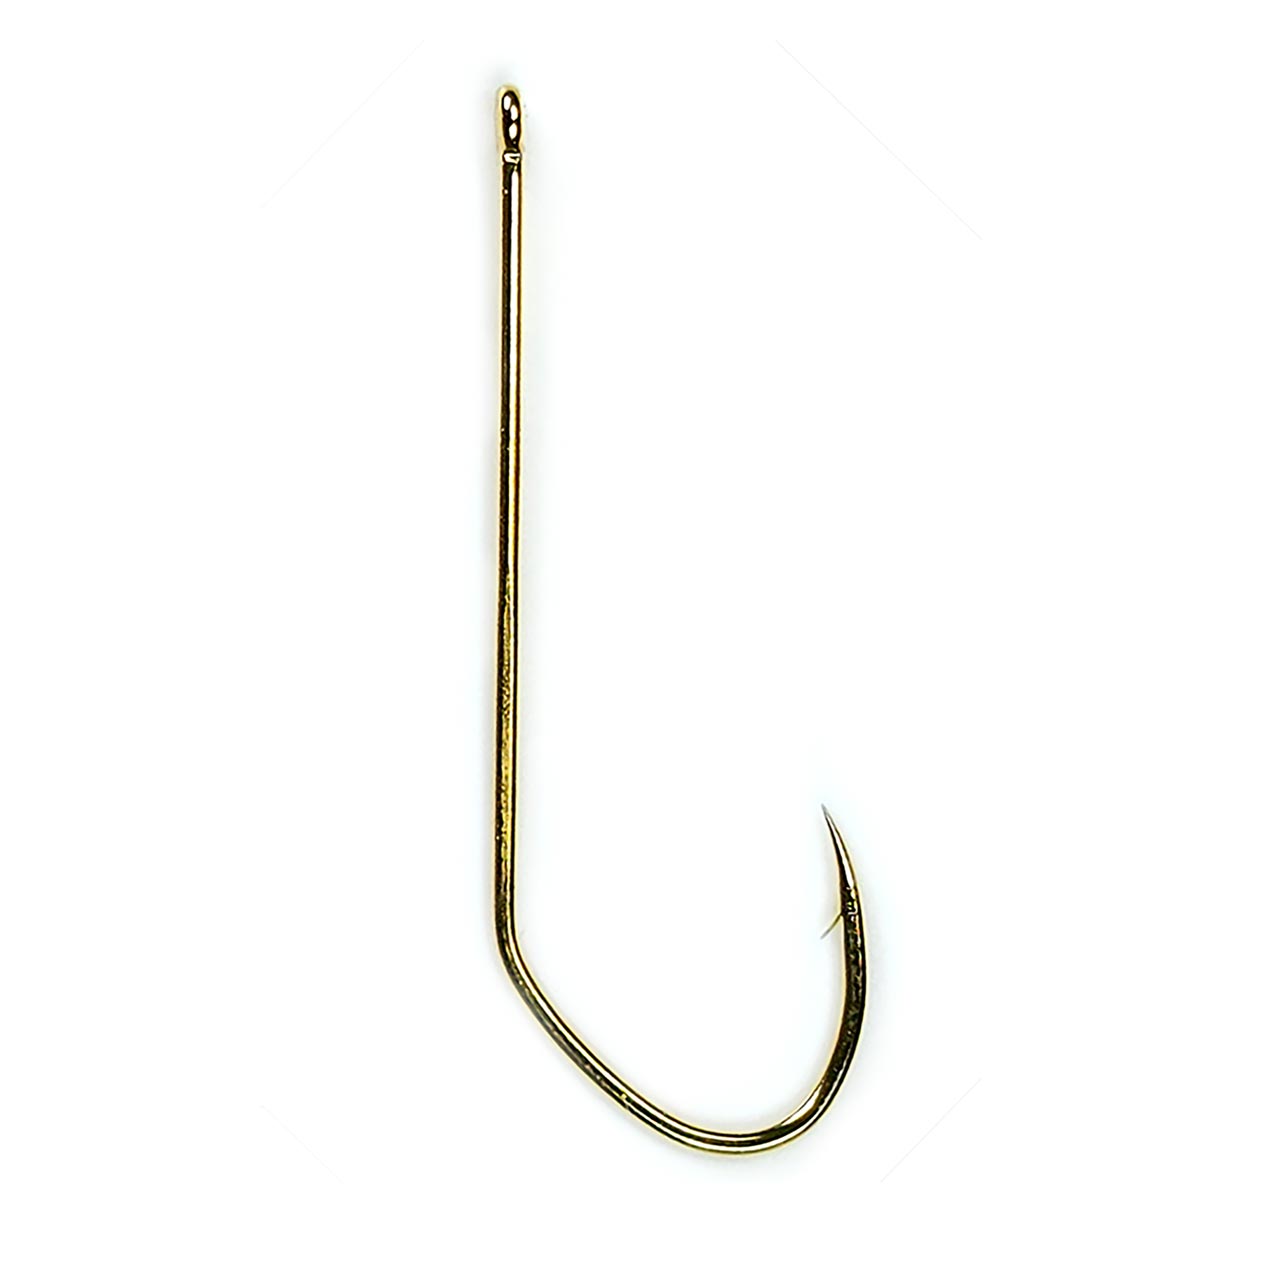 2, 4 or 6 size fishing hooks are the best hooks for crappie